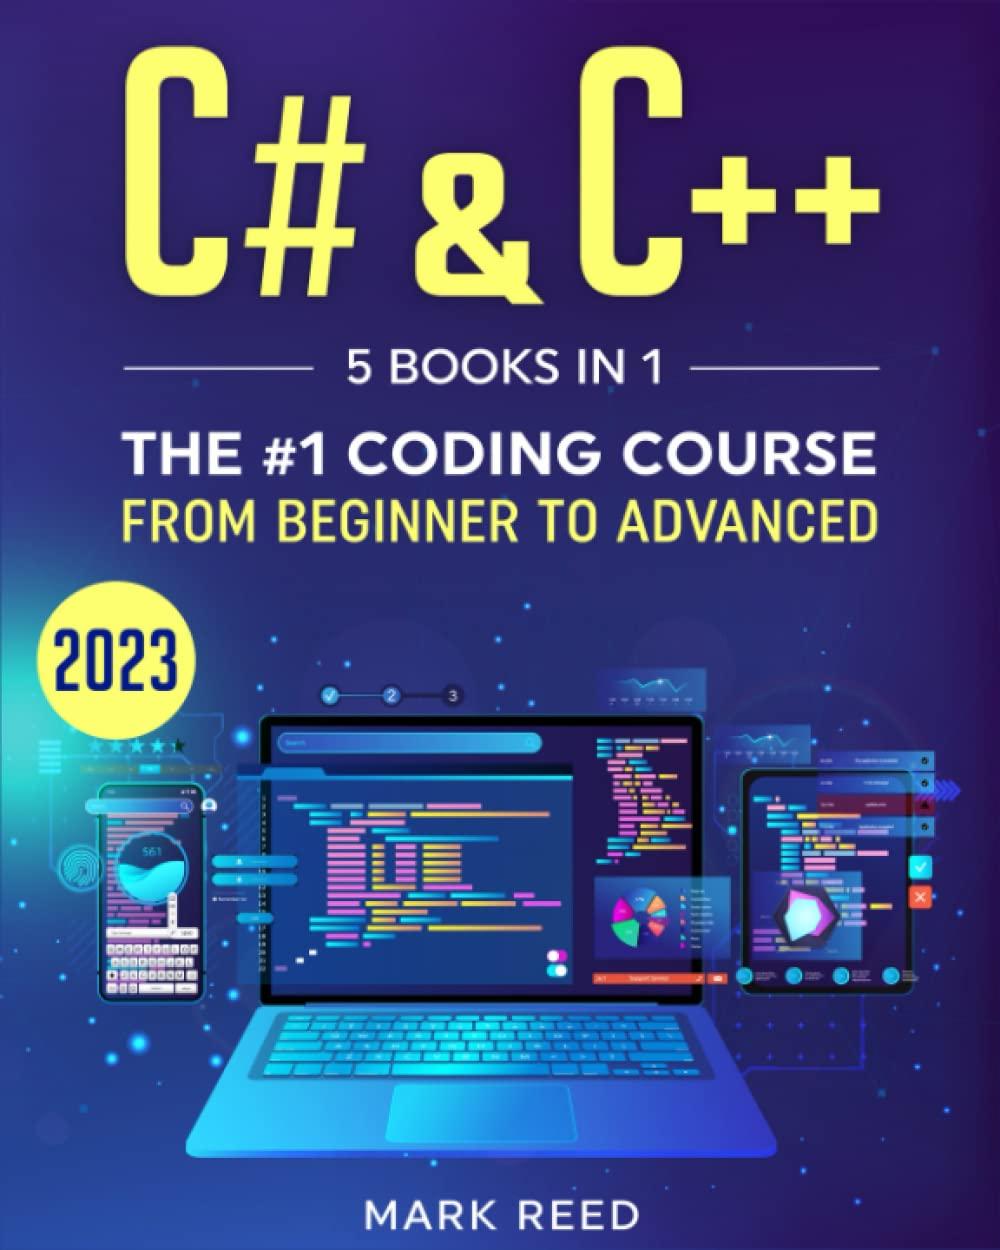 c# and c++ 5 books in 1 the #1 coding course from beginner to advanced 1st edition mark reed b0c1j1xljt,